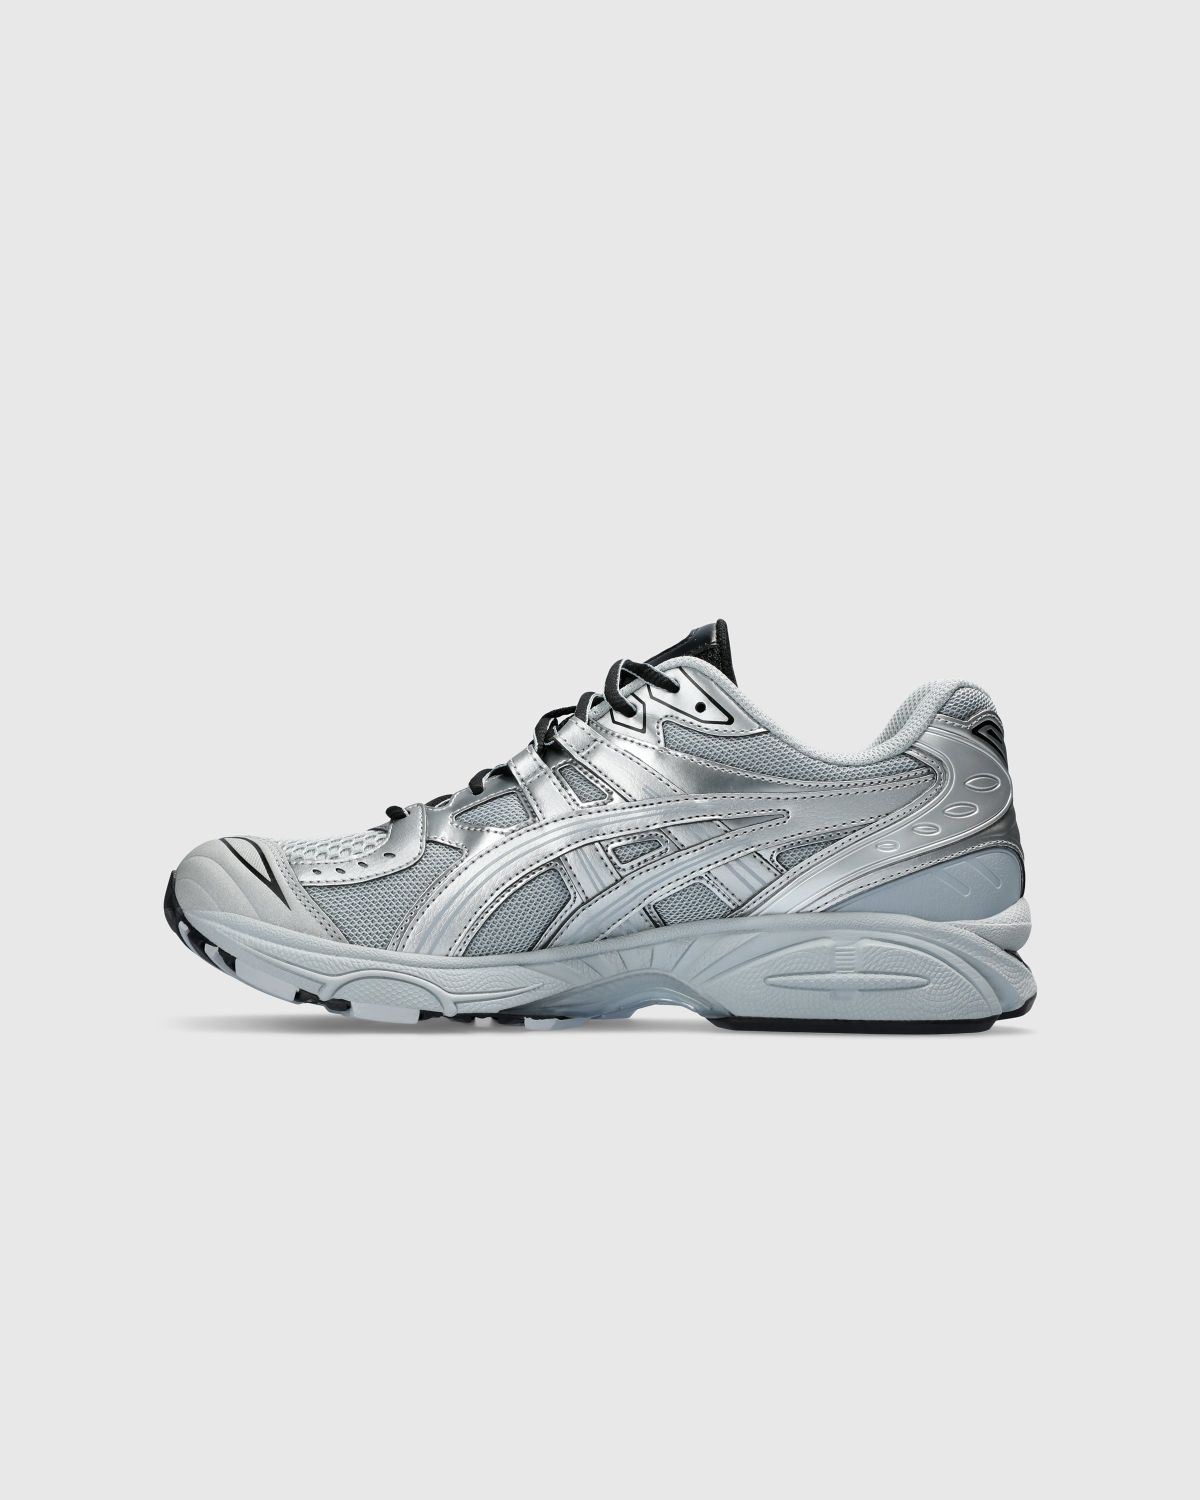 asics – GEL-KAYANO LEGACY Pure Silver - Sneakers - Silver - Image 2